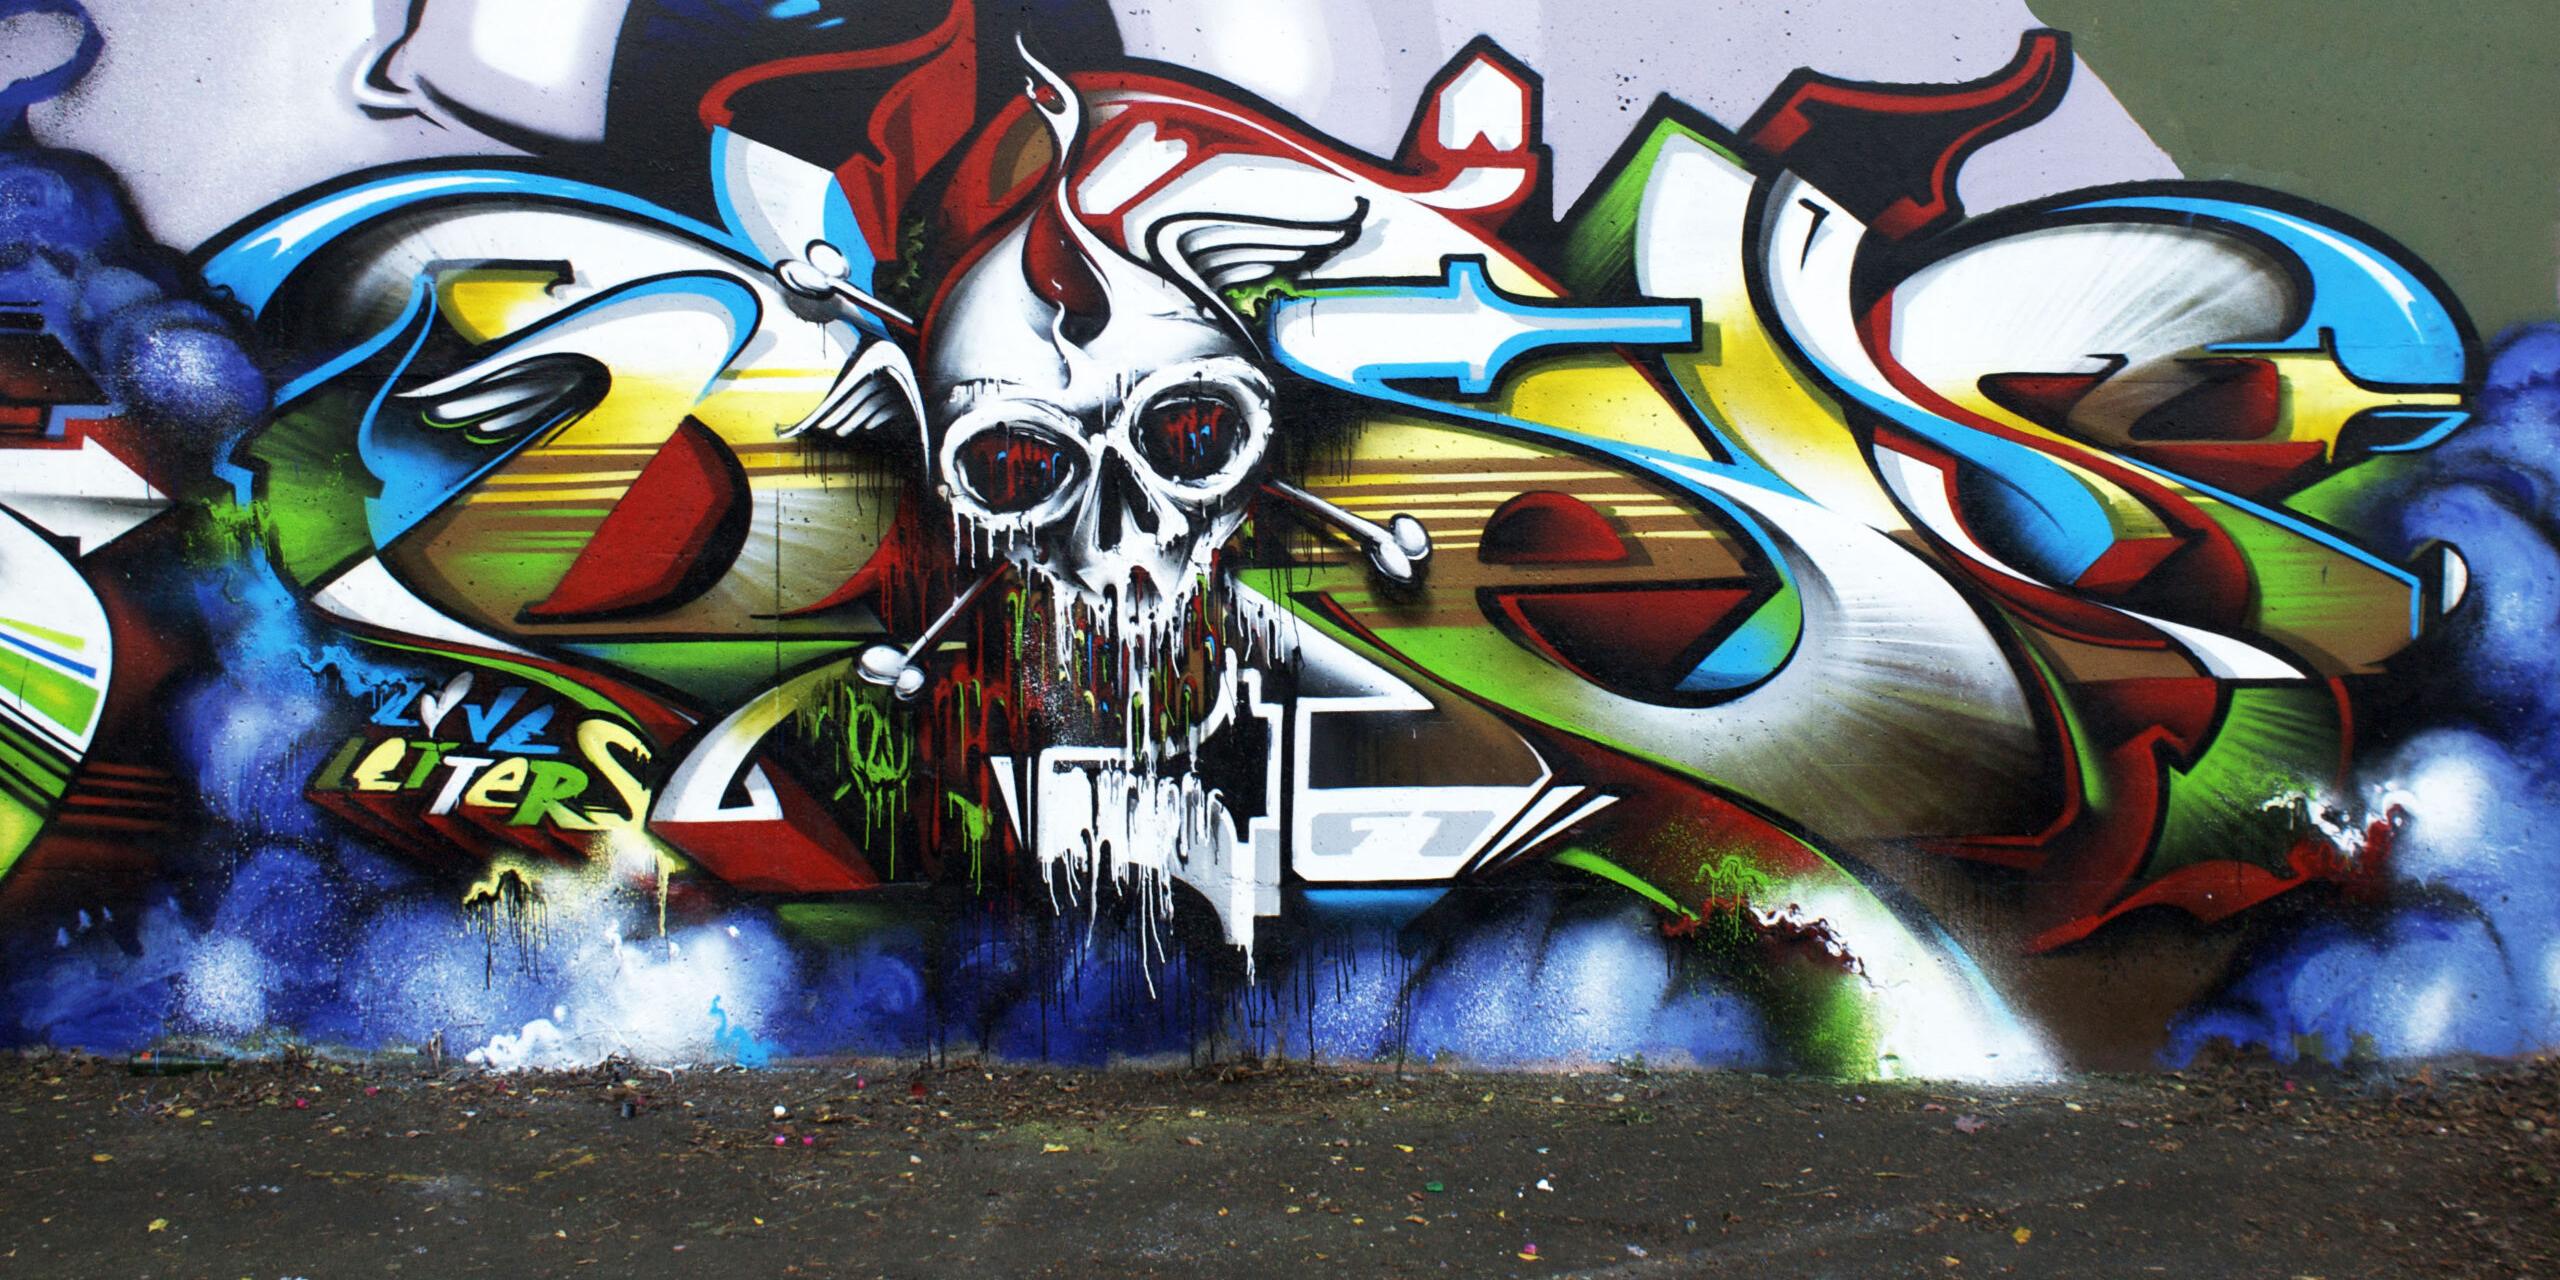 A work by Does - Auckland, New Zealand_thumb